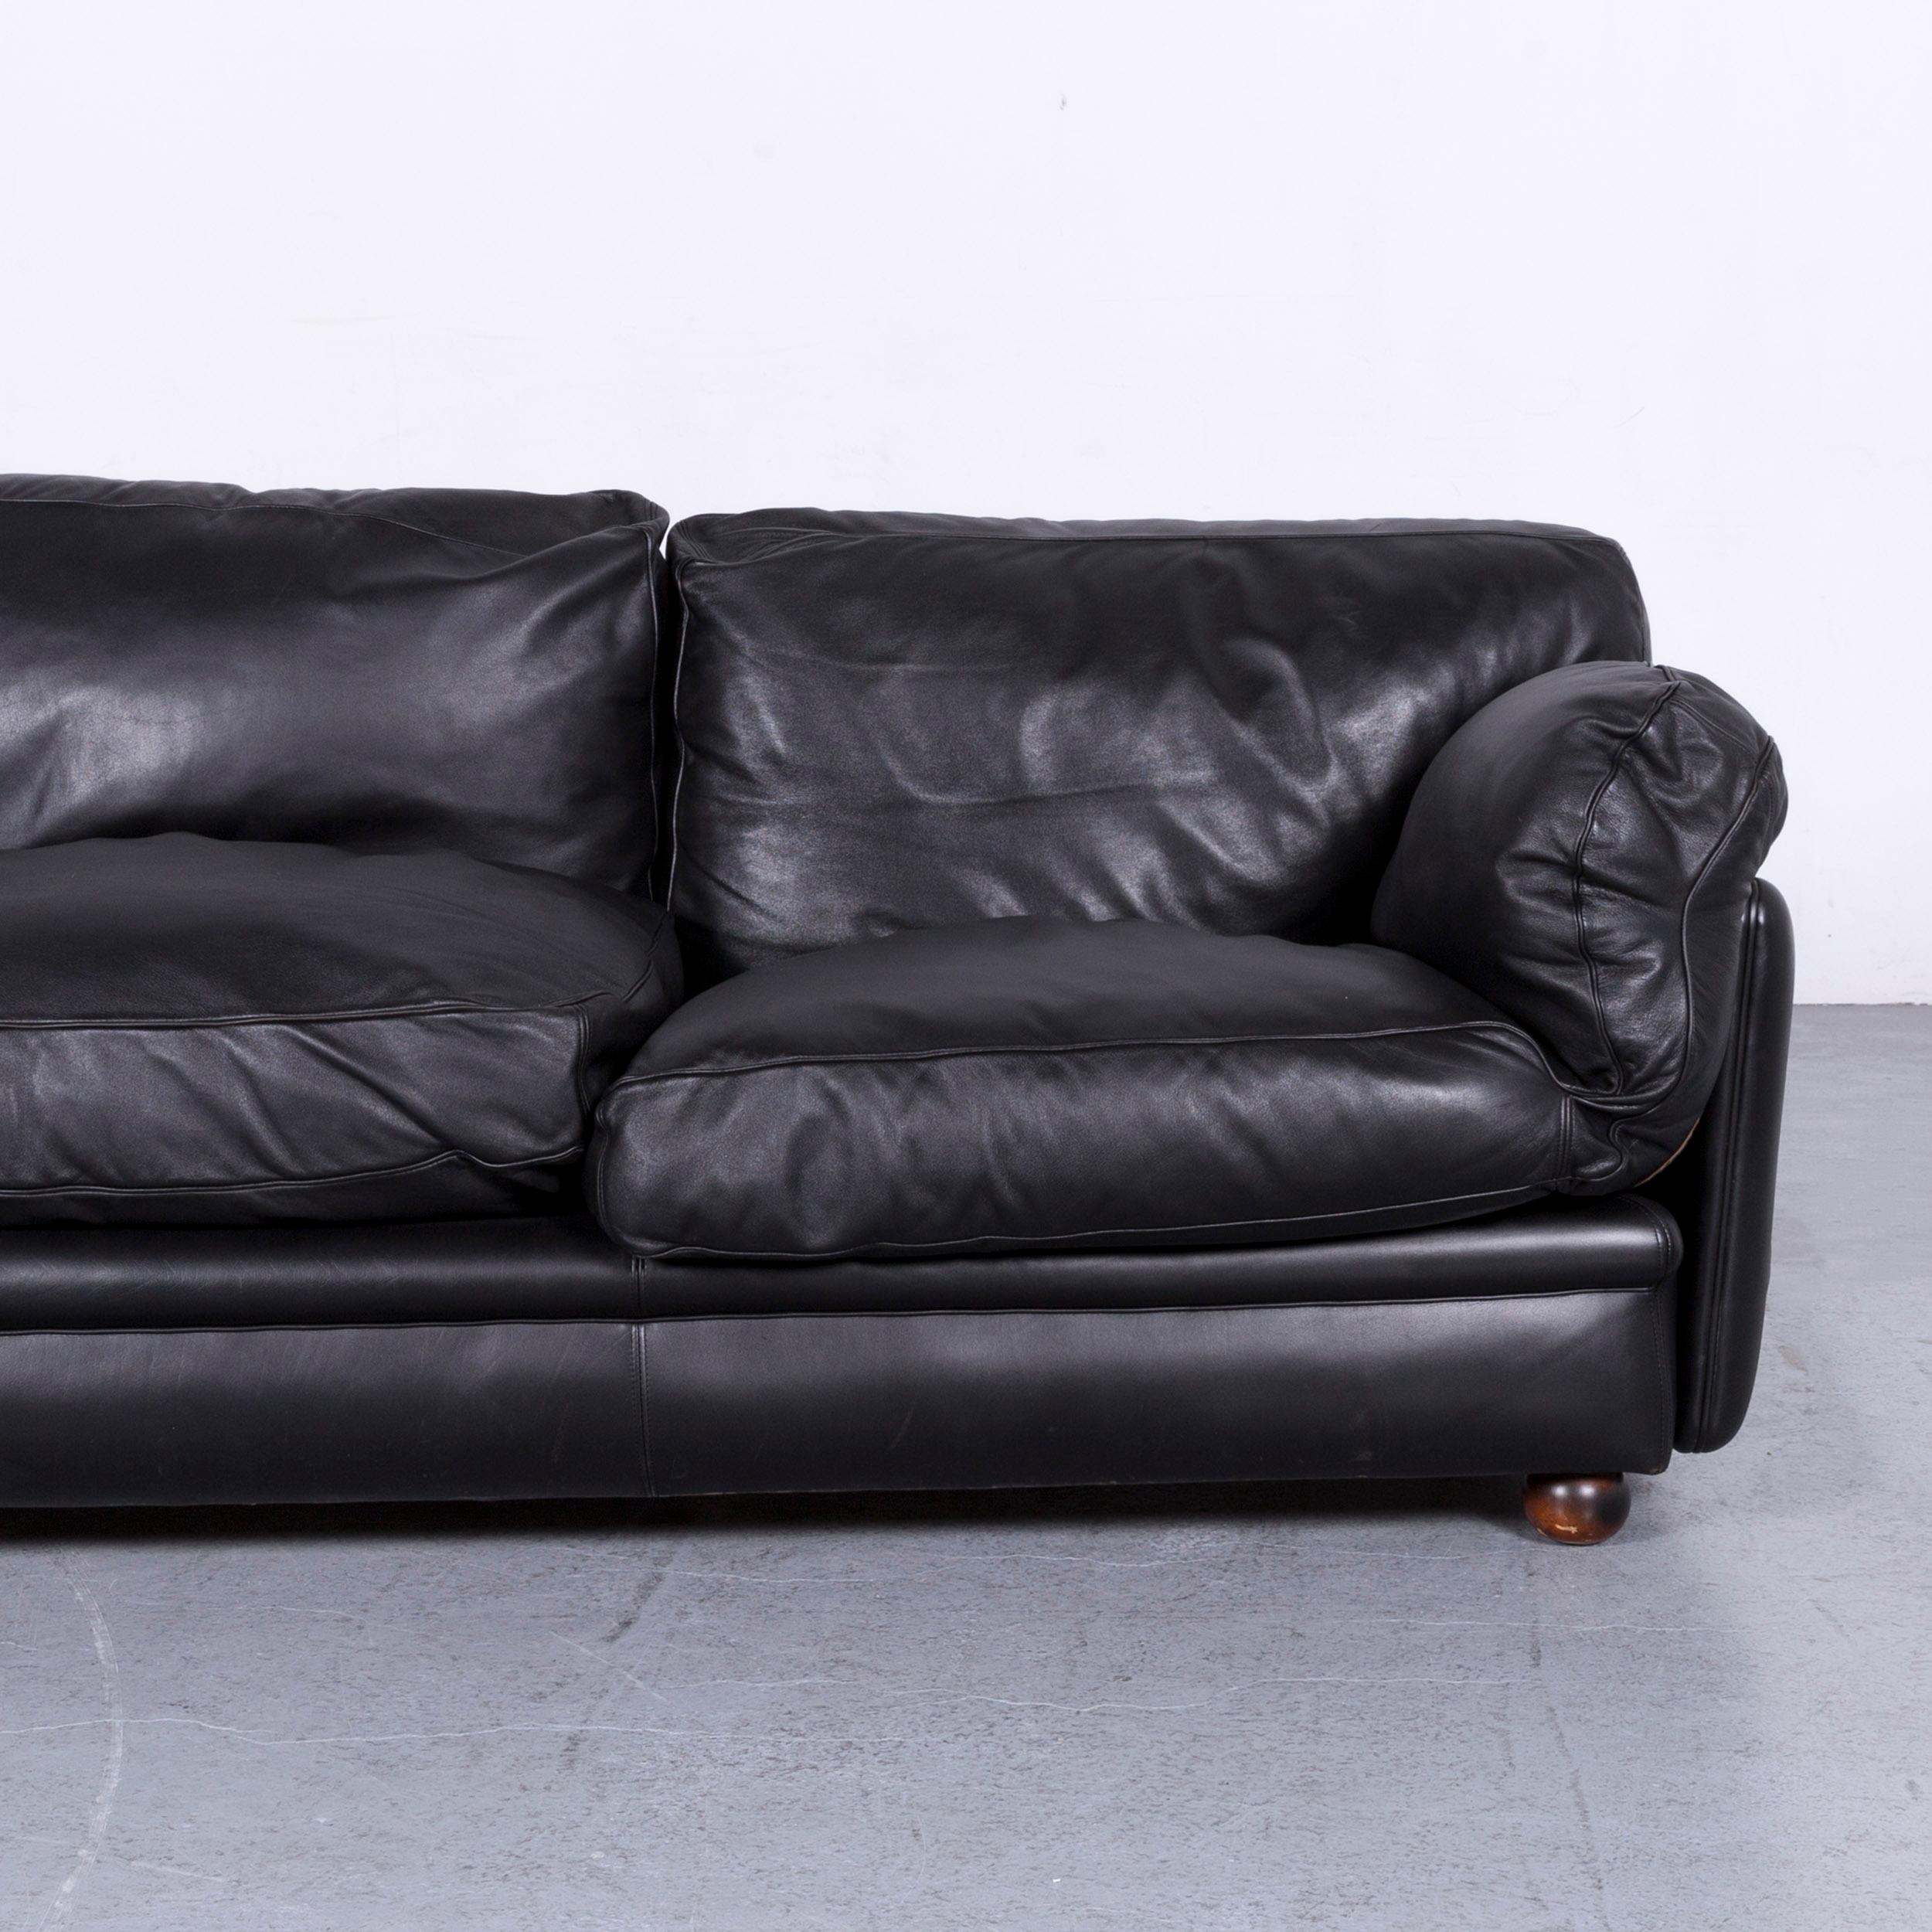 Poltrona Frau Designer Leather Sofa in Black Three-Seat Couch In Good Condition For Sale In Cologne, DE